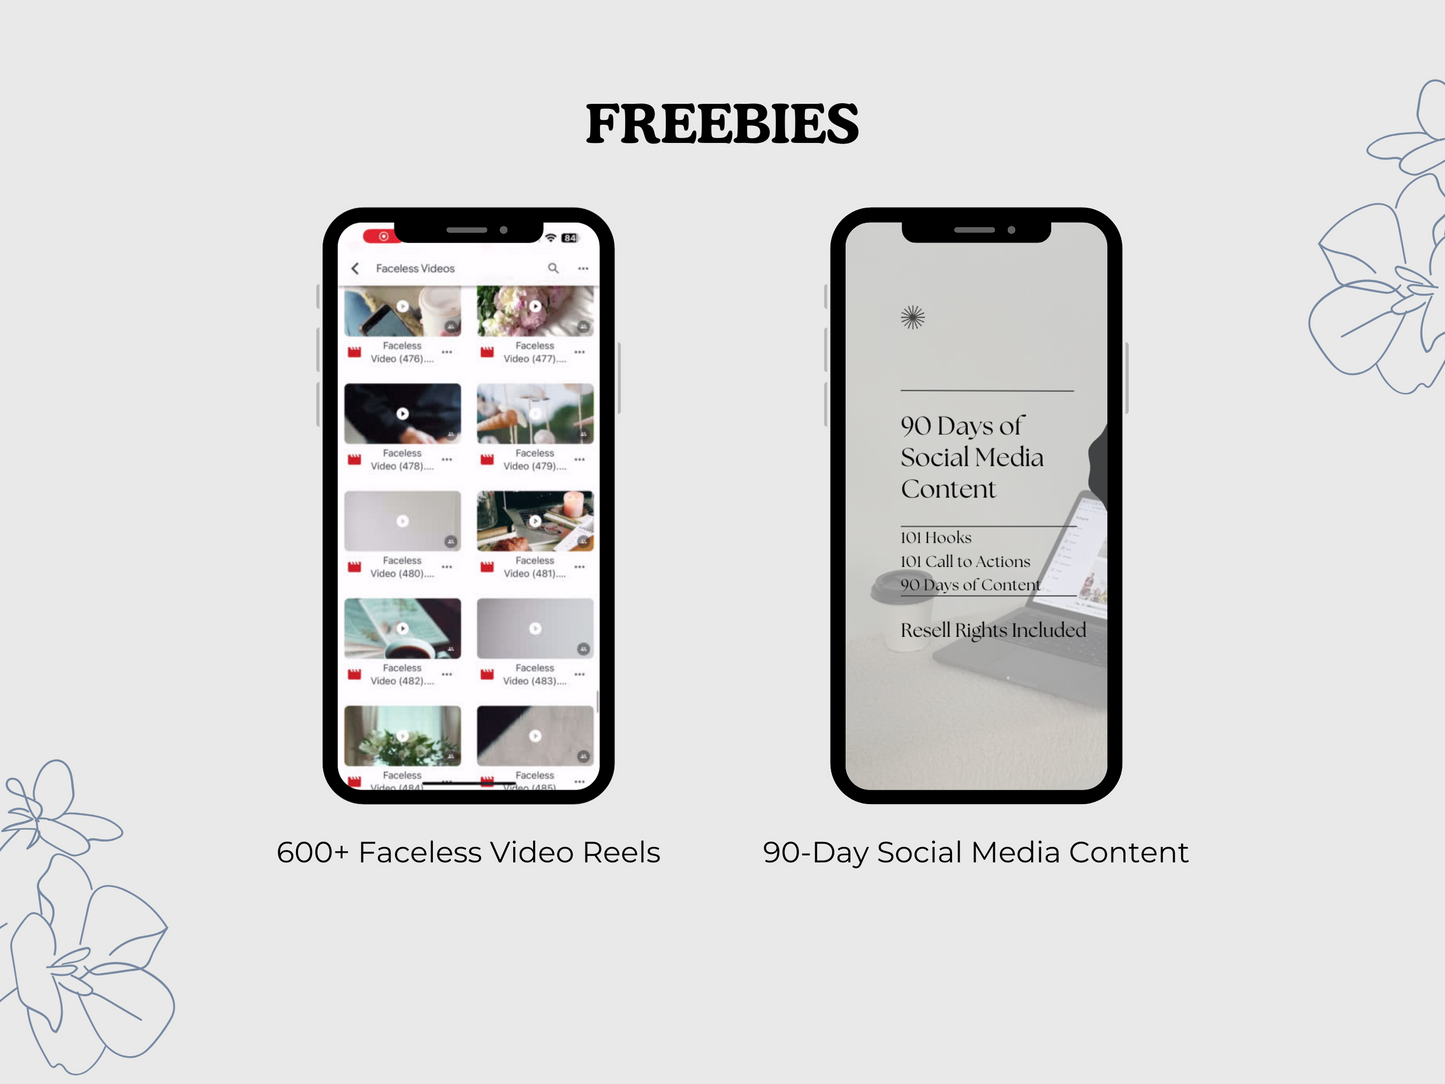 Faceless Digital Marketing with 600+ Faceless Video Reels